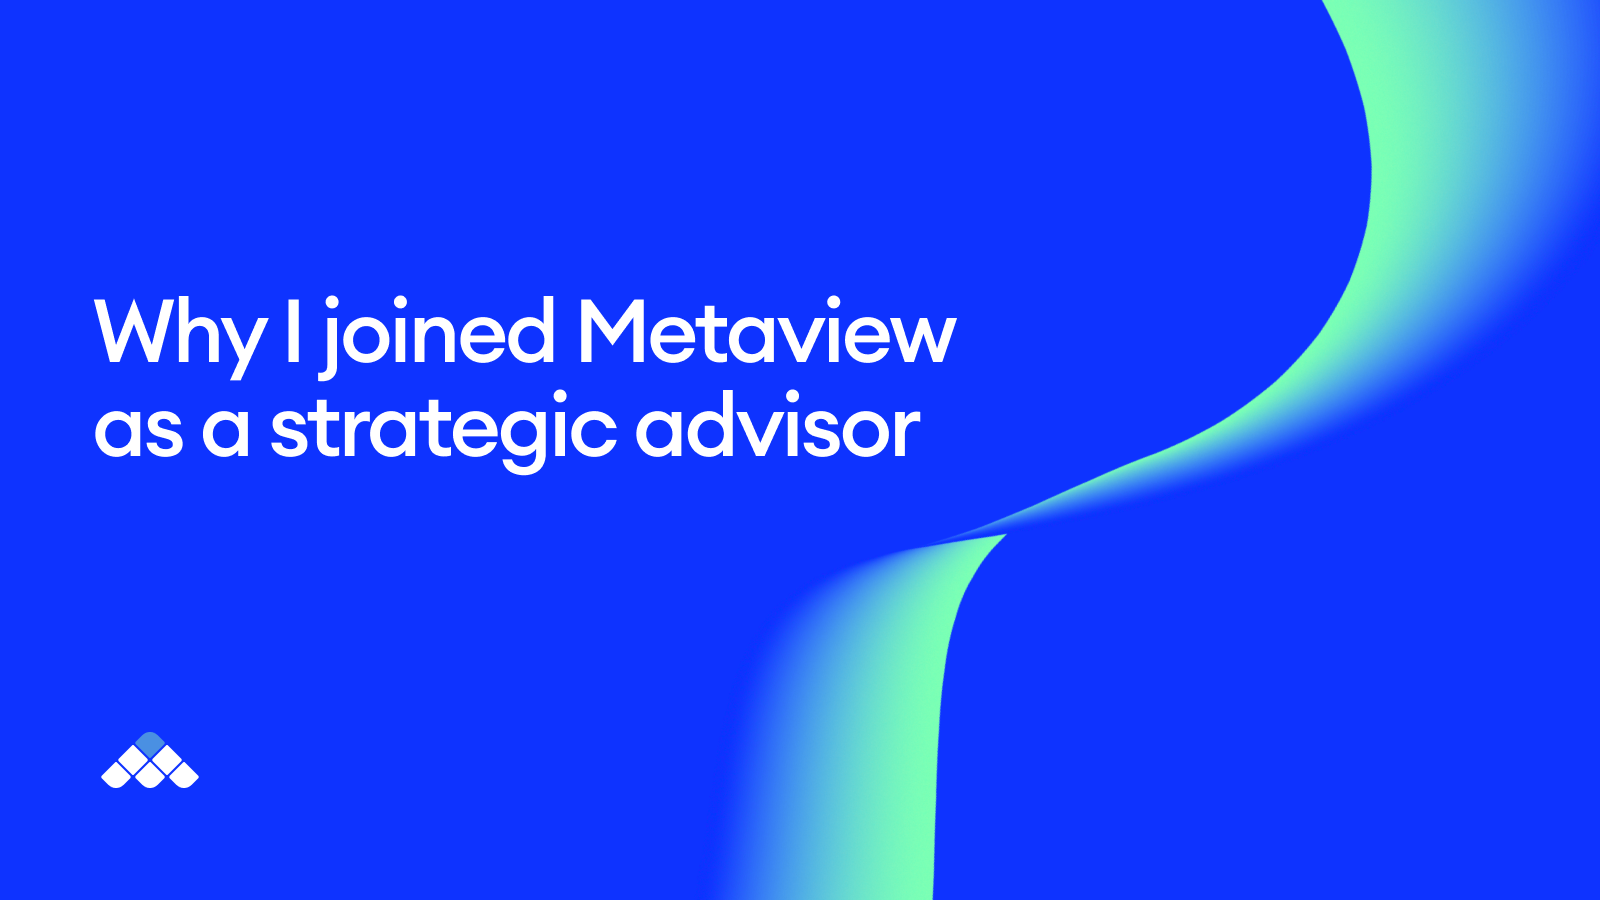 Why I joined Metaview as a strategic advisor